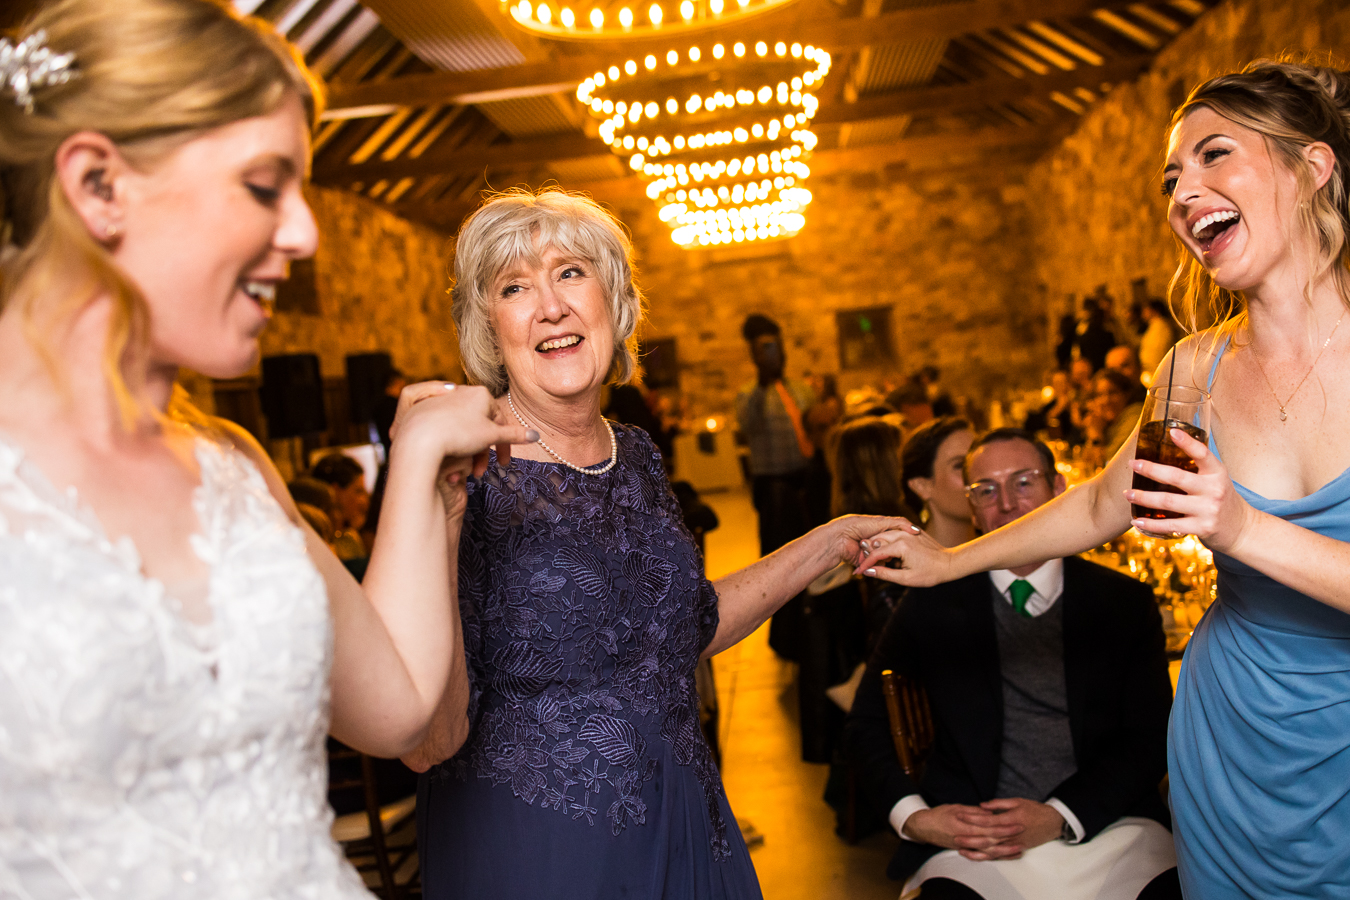 candid moment of the bride and her sister dancing with their mom during this fun, unique indoor wedding reception 